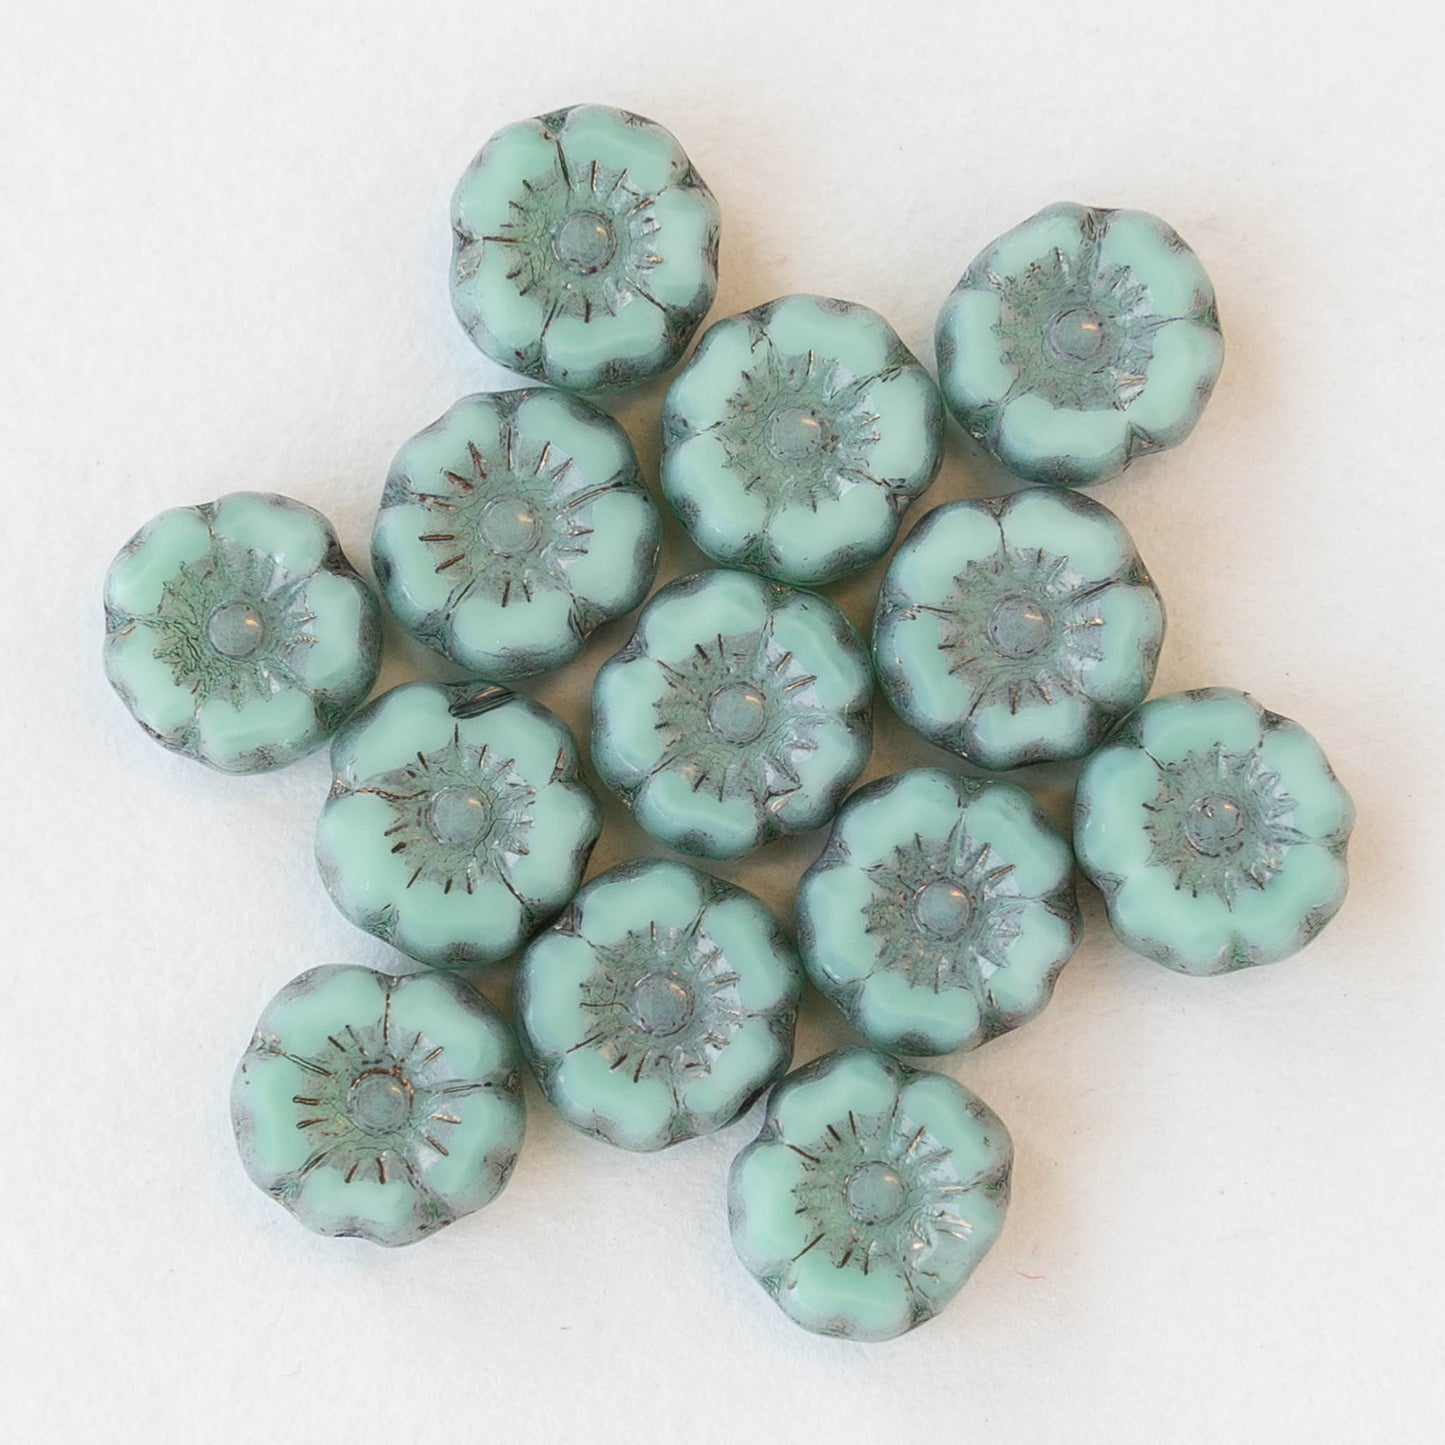 7mm Glass Flower Beads - Light Blue with Picasso Wash - 12 Beads